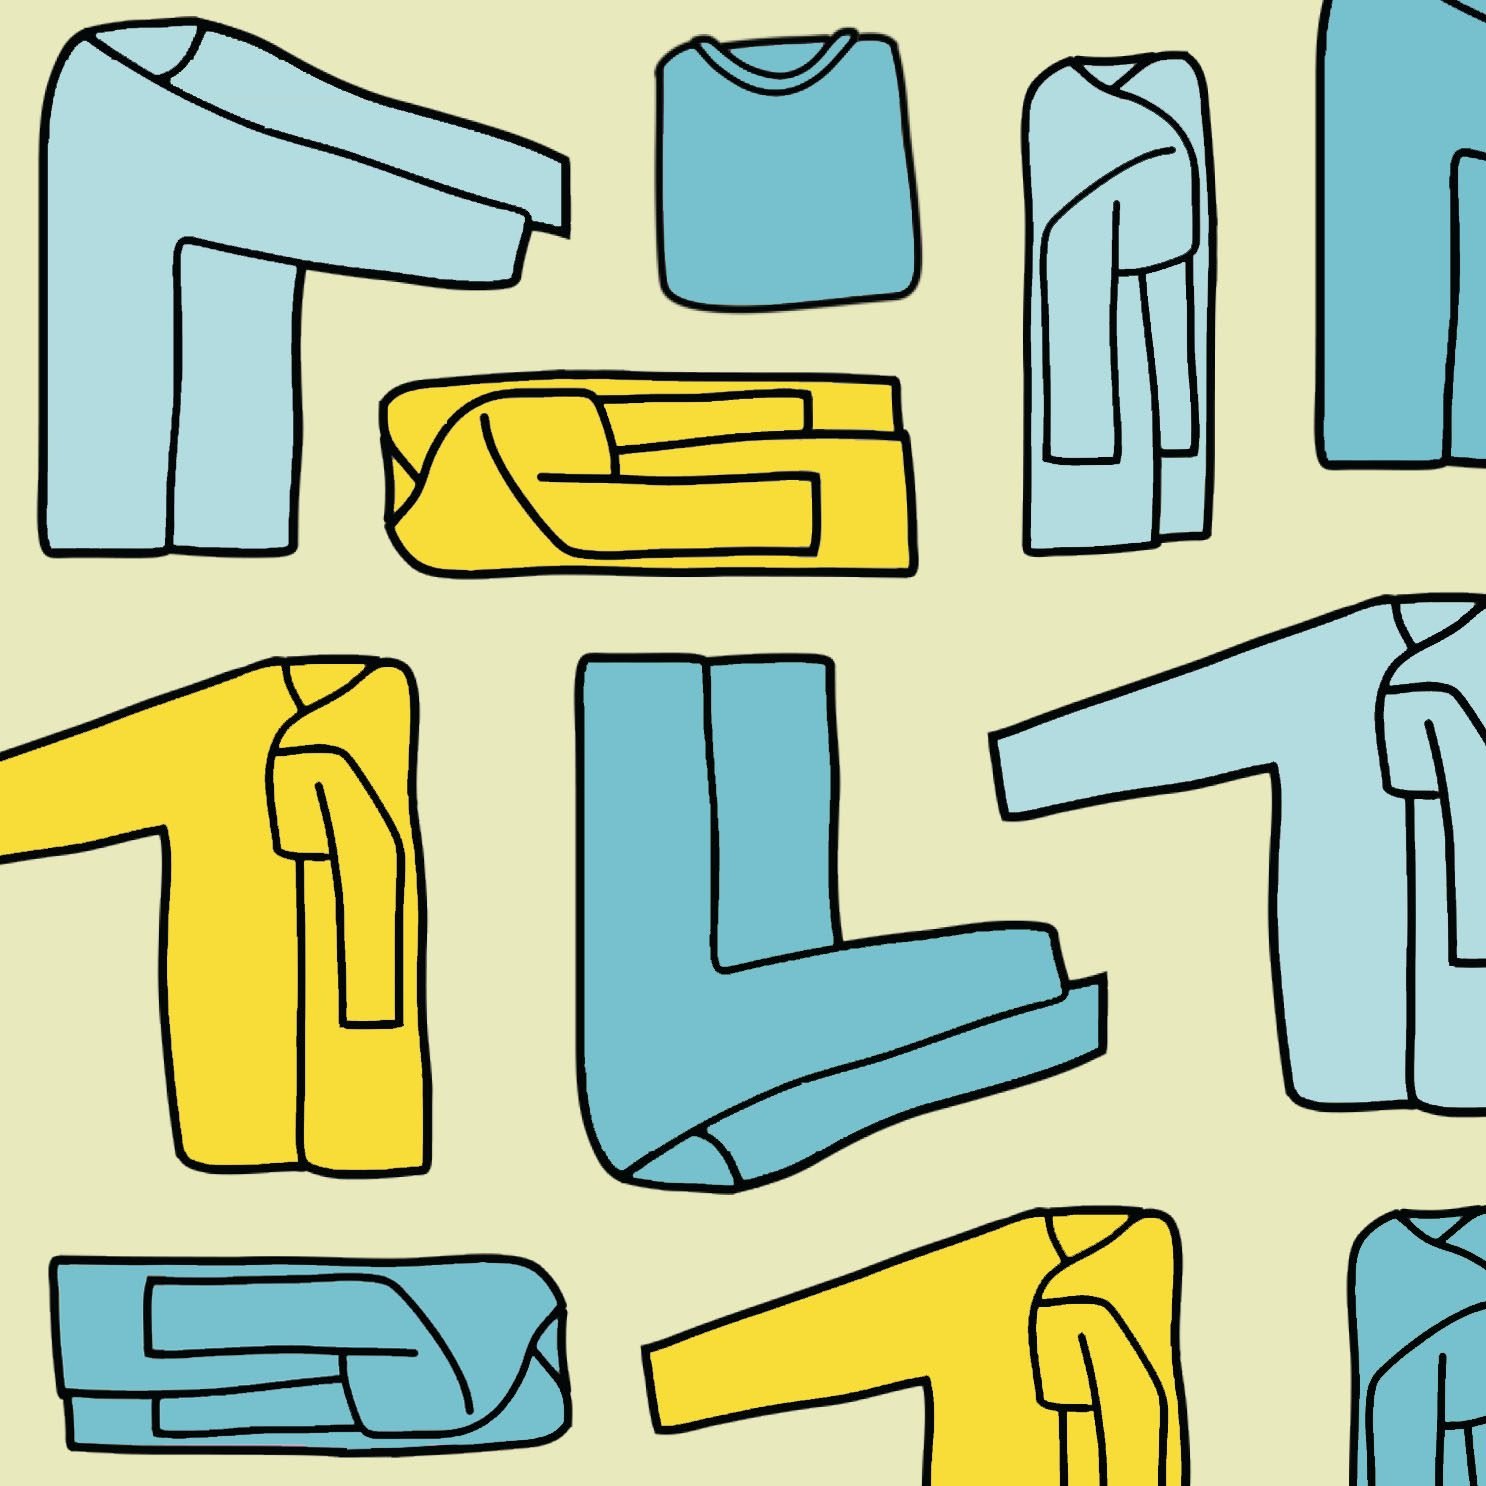 Easy And Quick Tips To Fold Clothes For Laundry